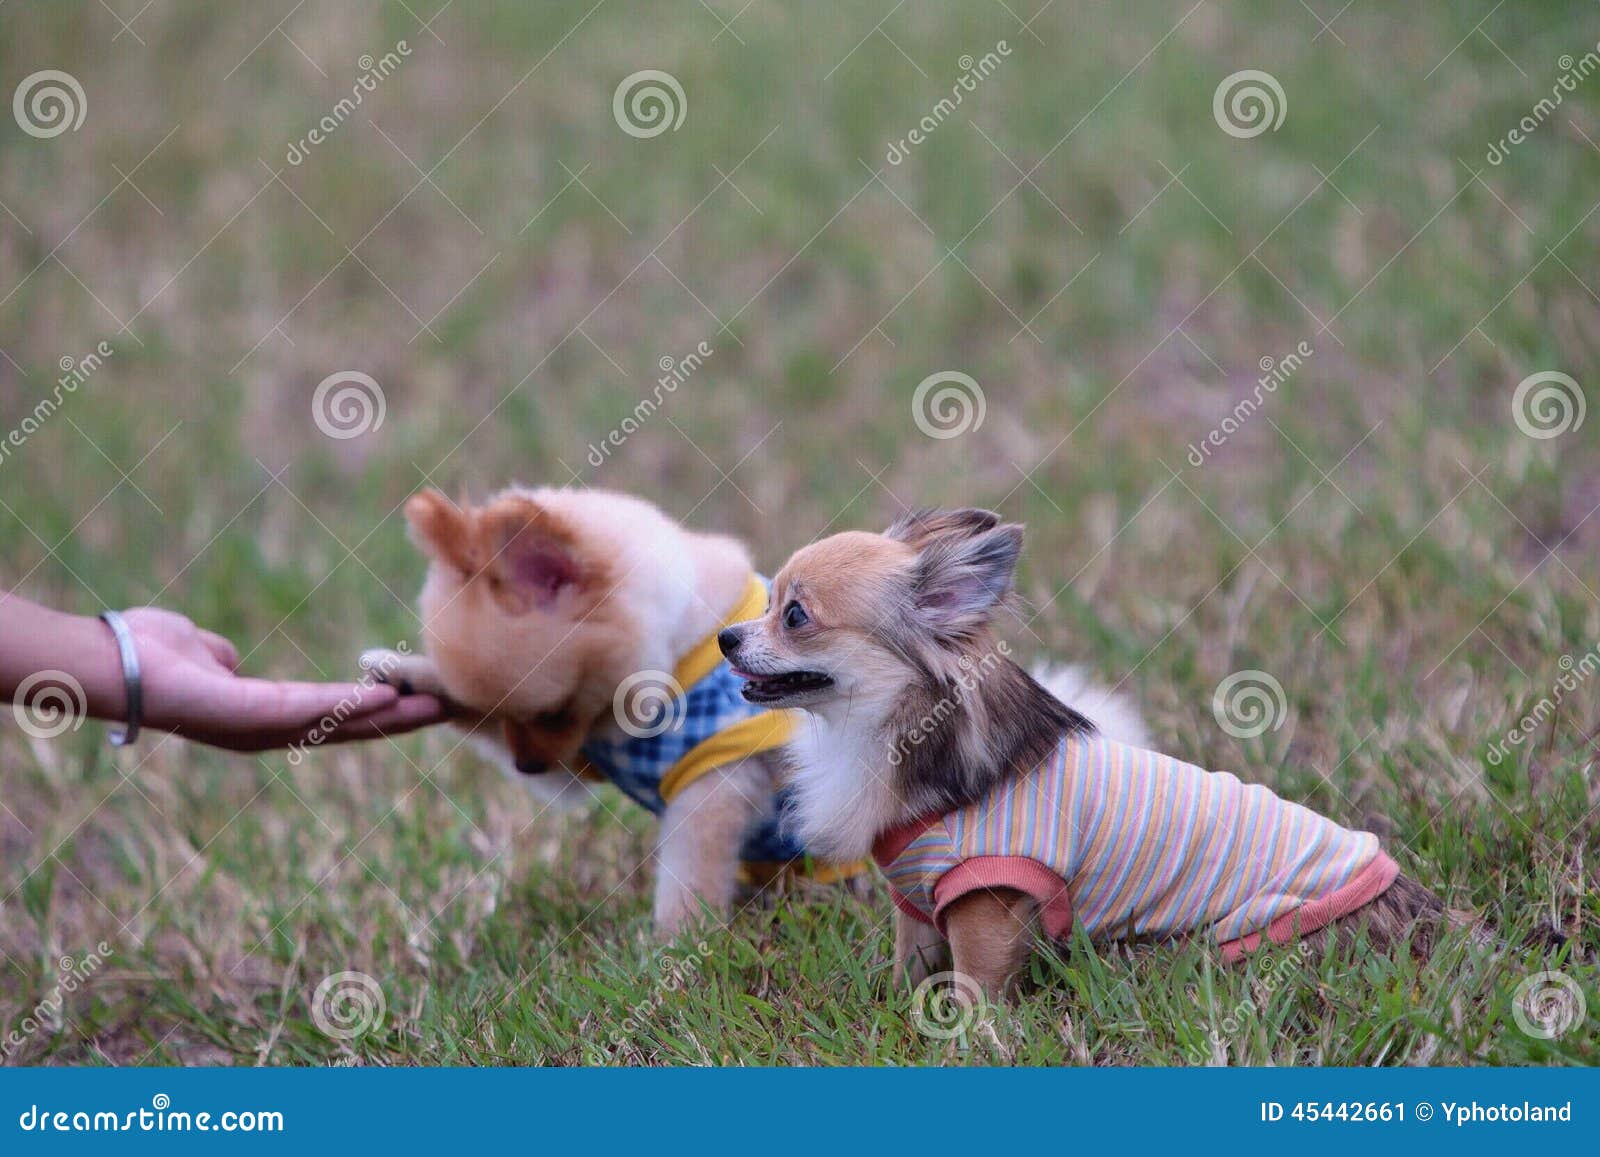 Small Dogs Stock Photo - Image: 45442661